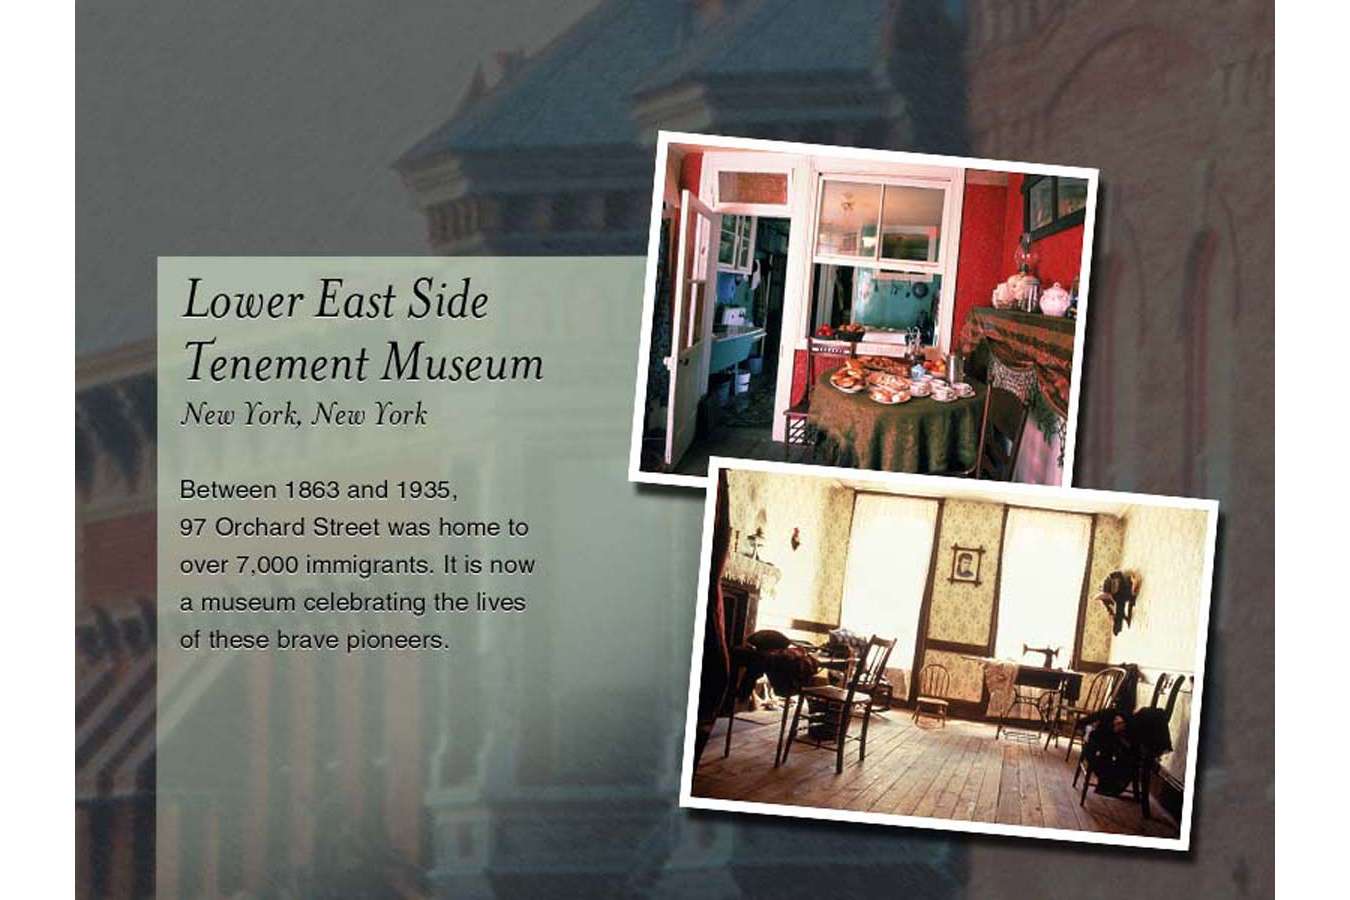 NTHP nytm : For the New York Tenement Museum, custom distressed wood frame created